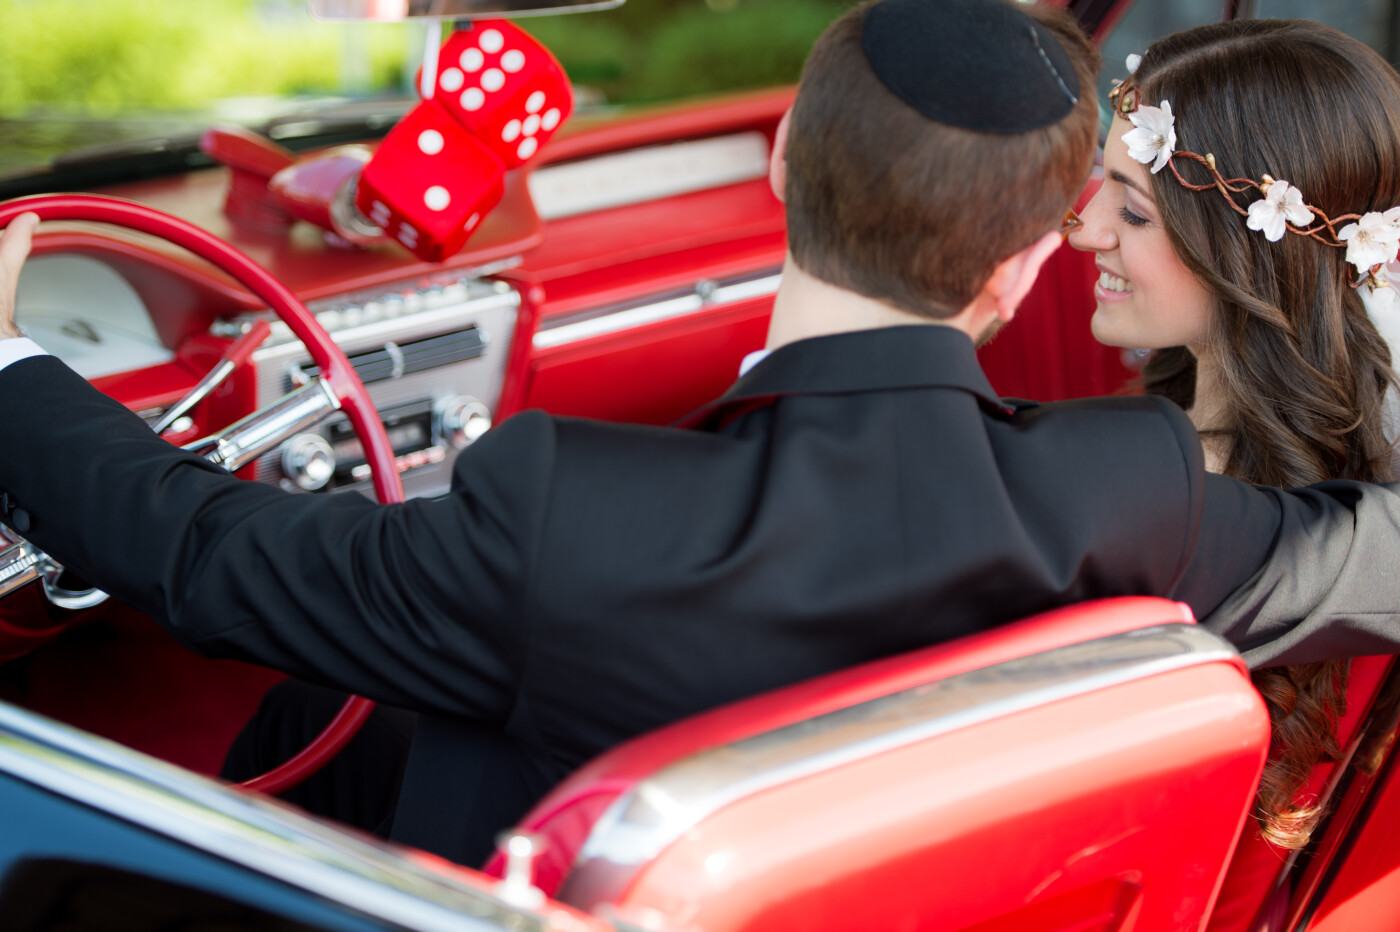 I loved this beautiful couple and incredible vintage car. What a beautiful day!<br />
